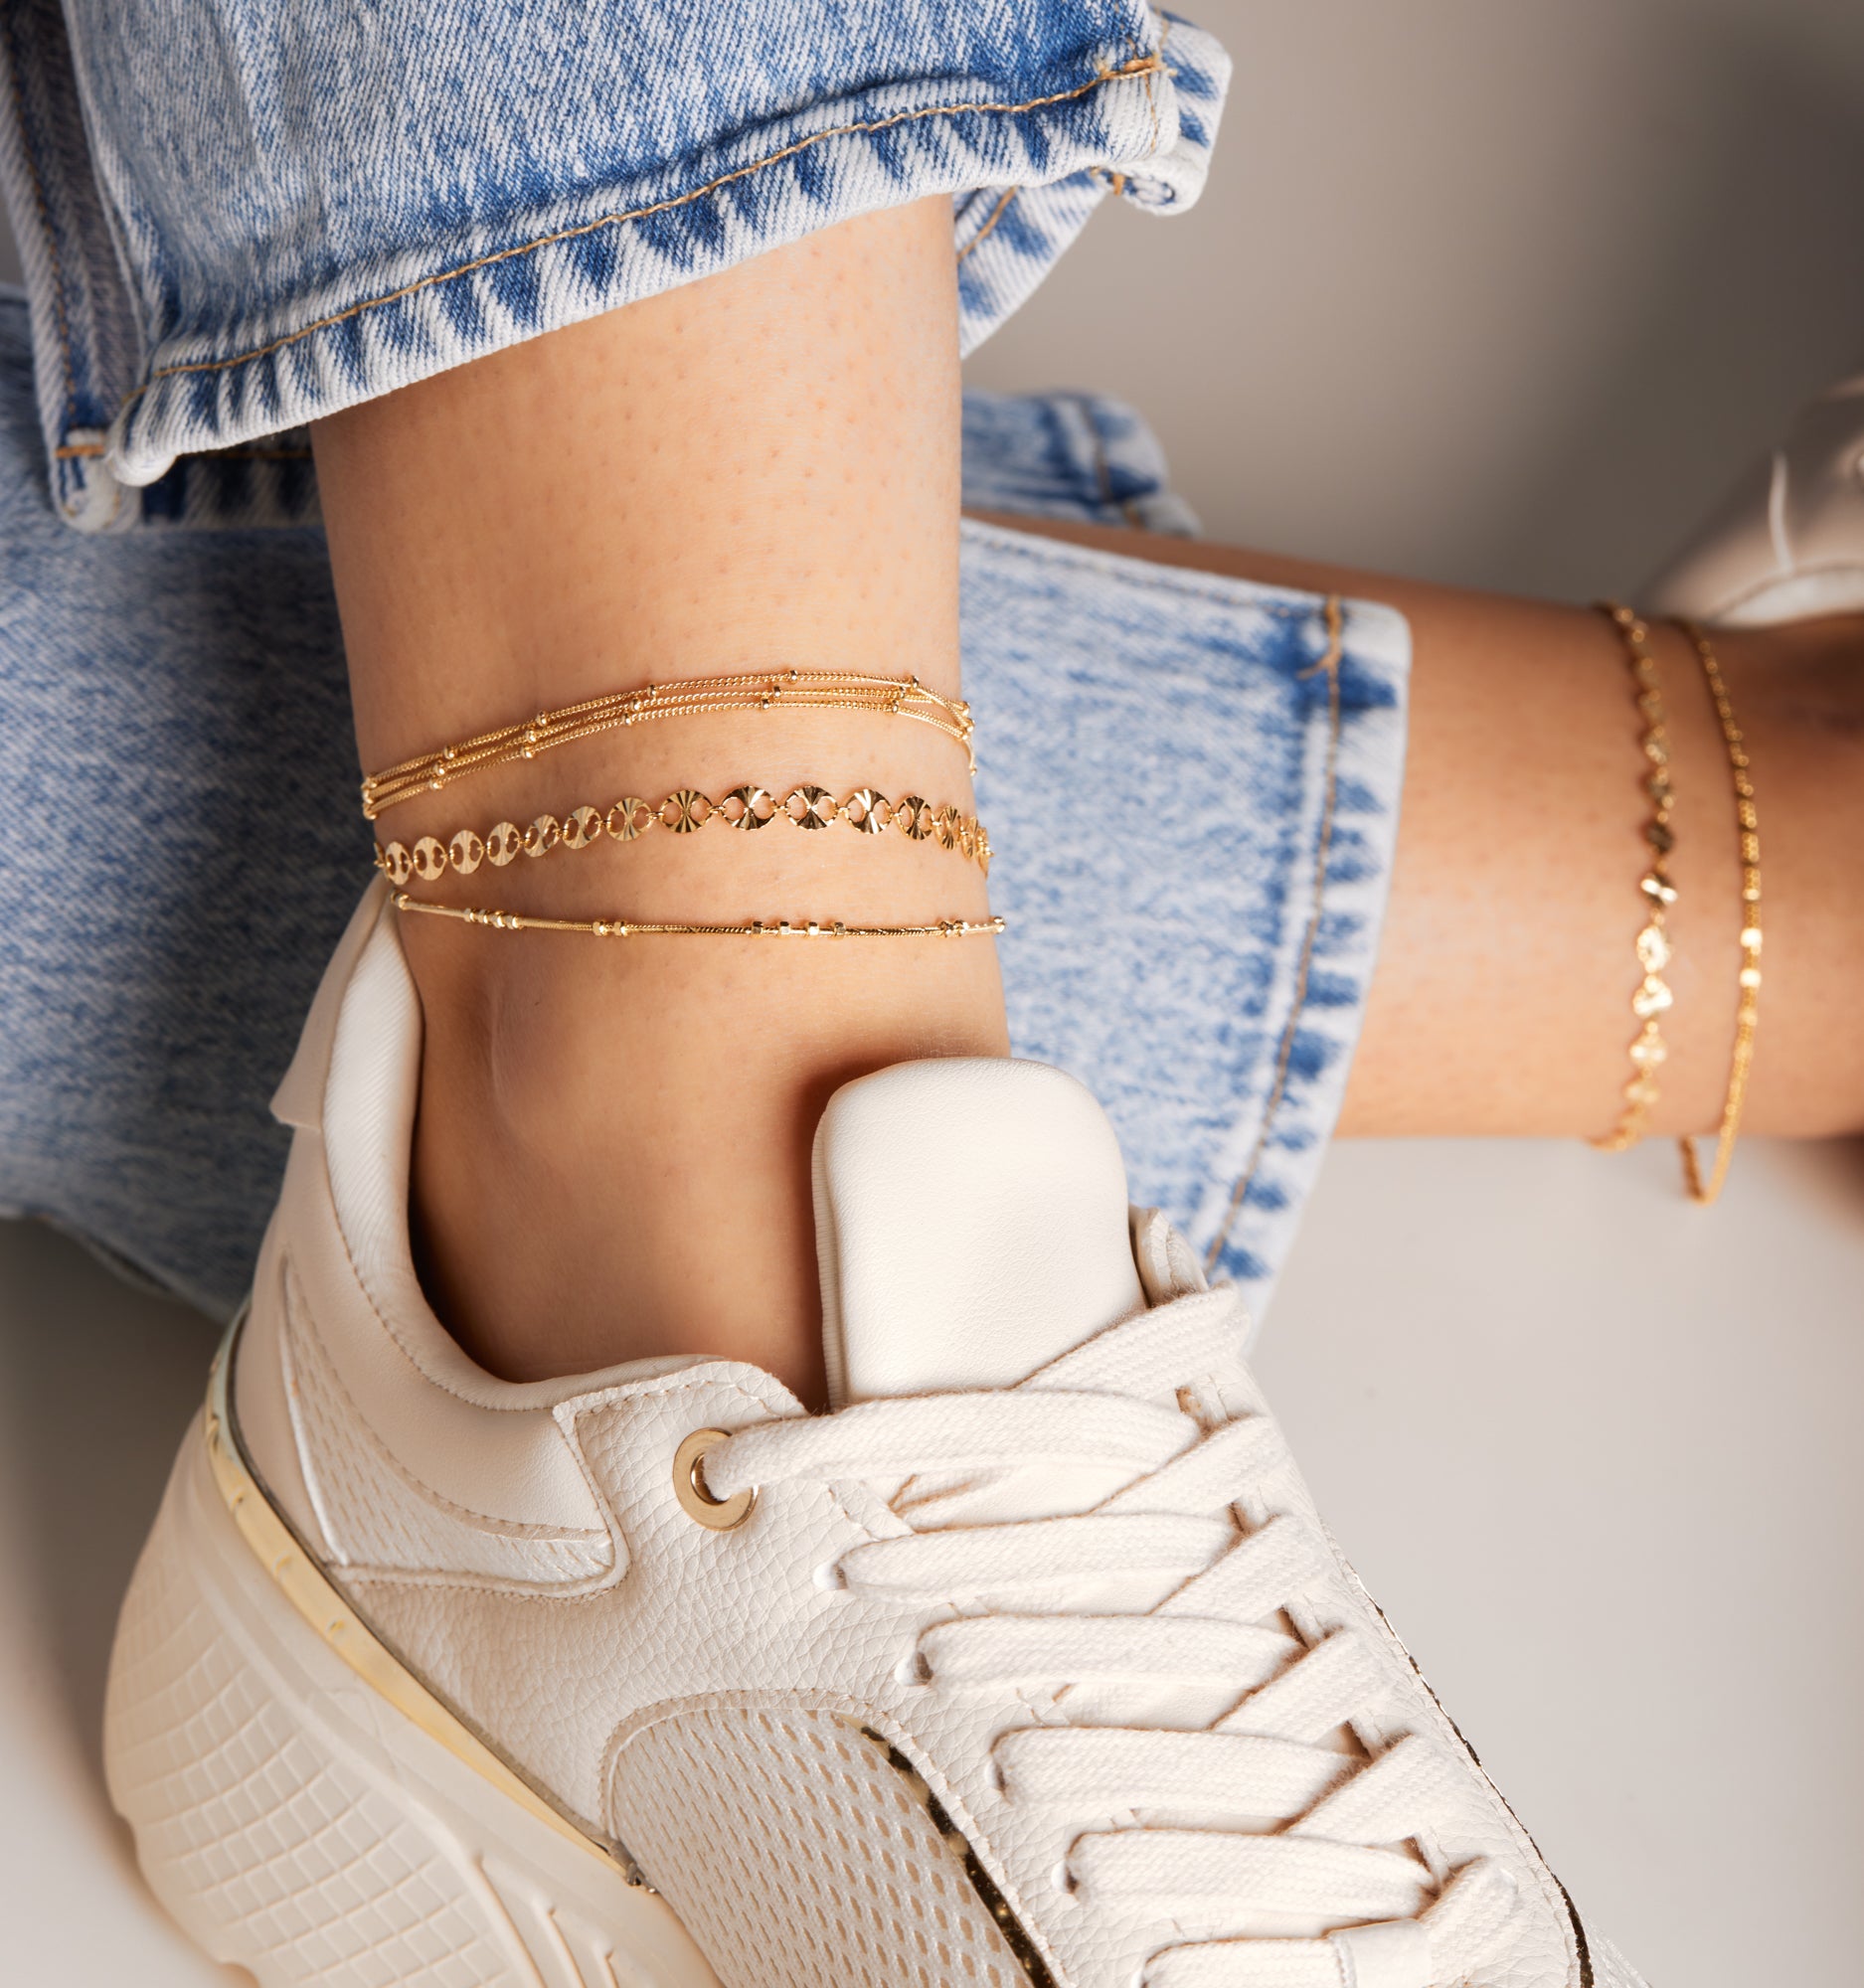 Gold Layered Anklet